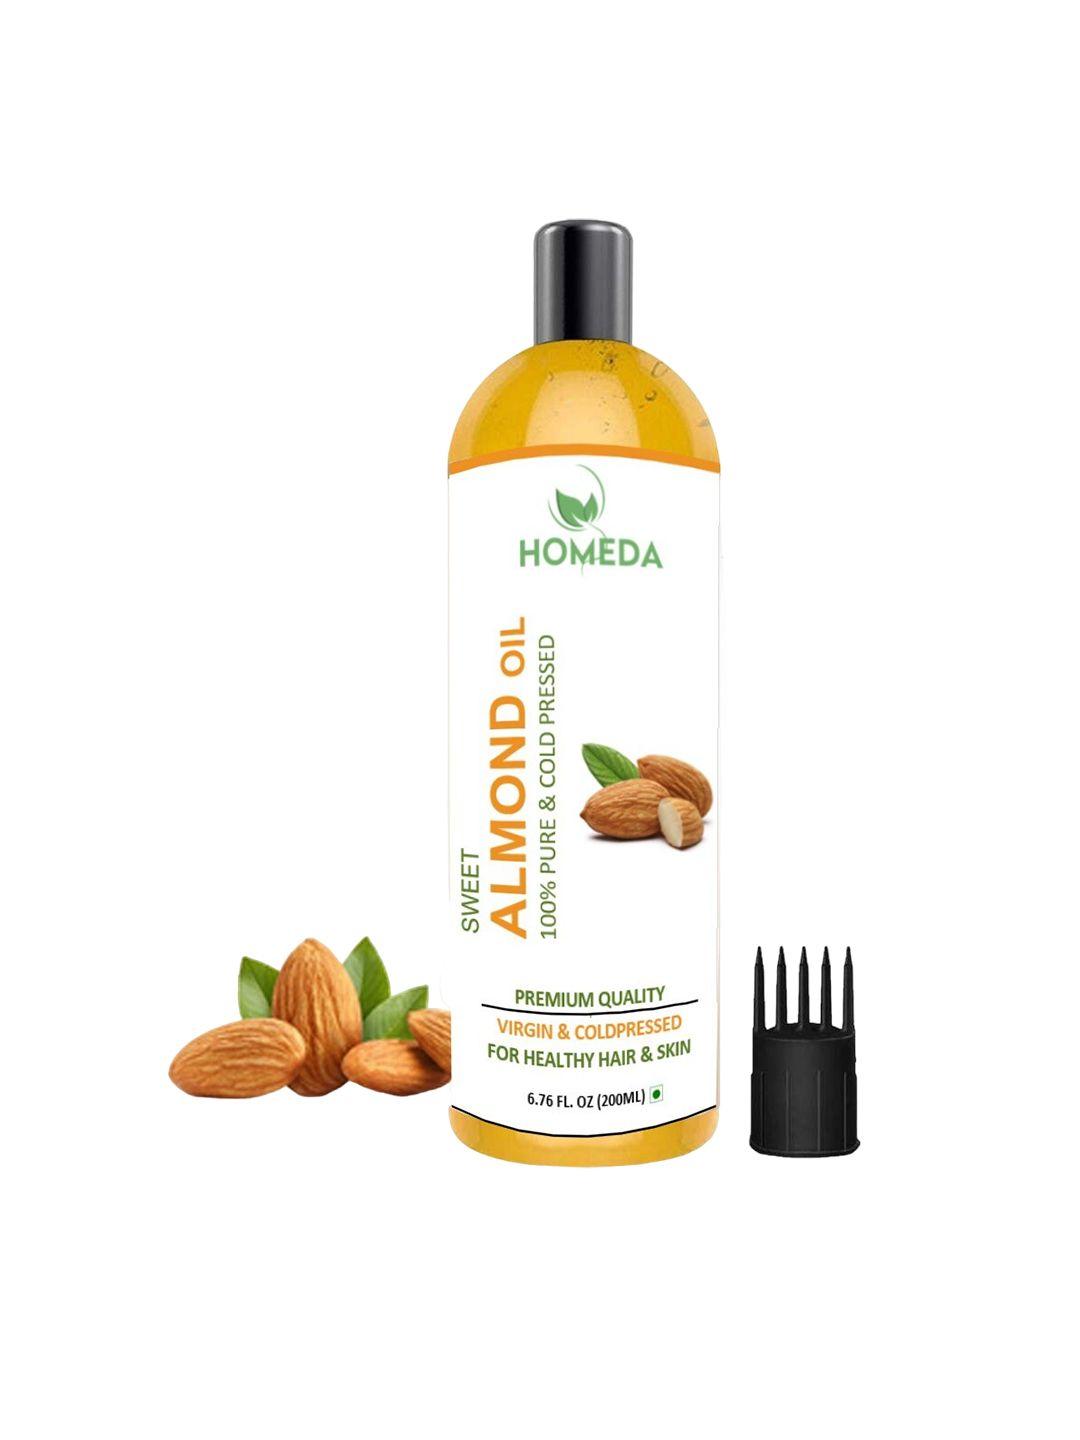 shudh online cold pressed almond oil with comb apllicator-200 ml